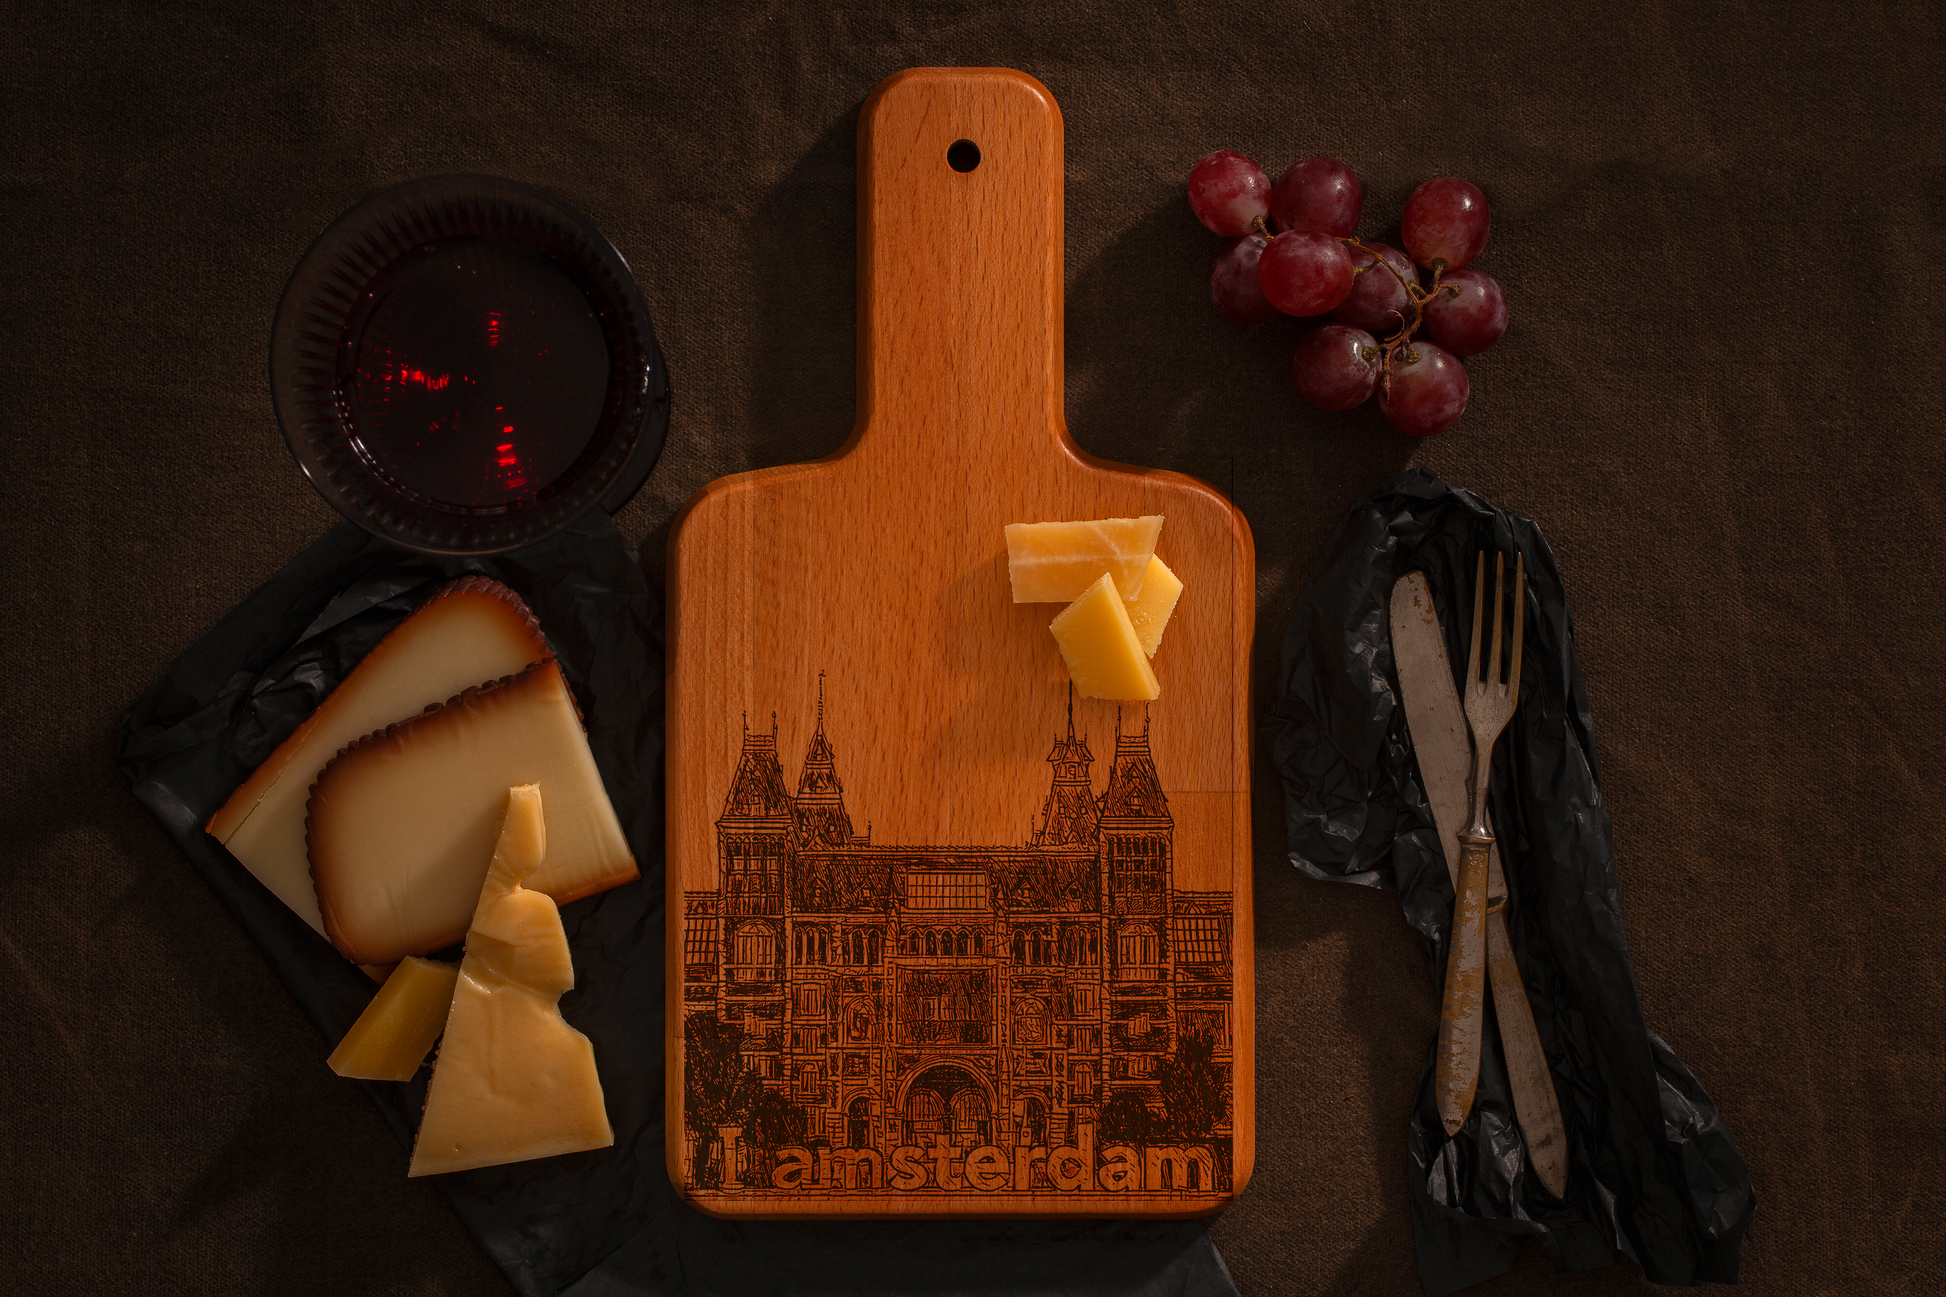 Amsterdam, Museumplein, cheese board, with cheese